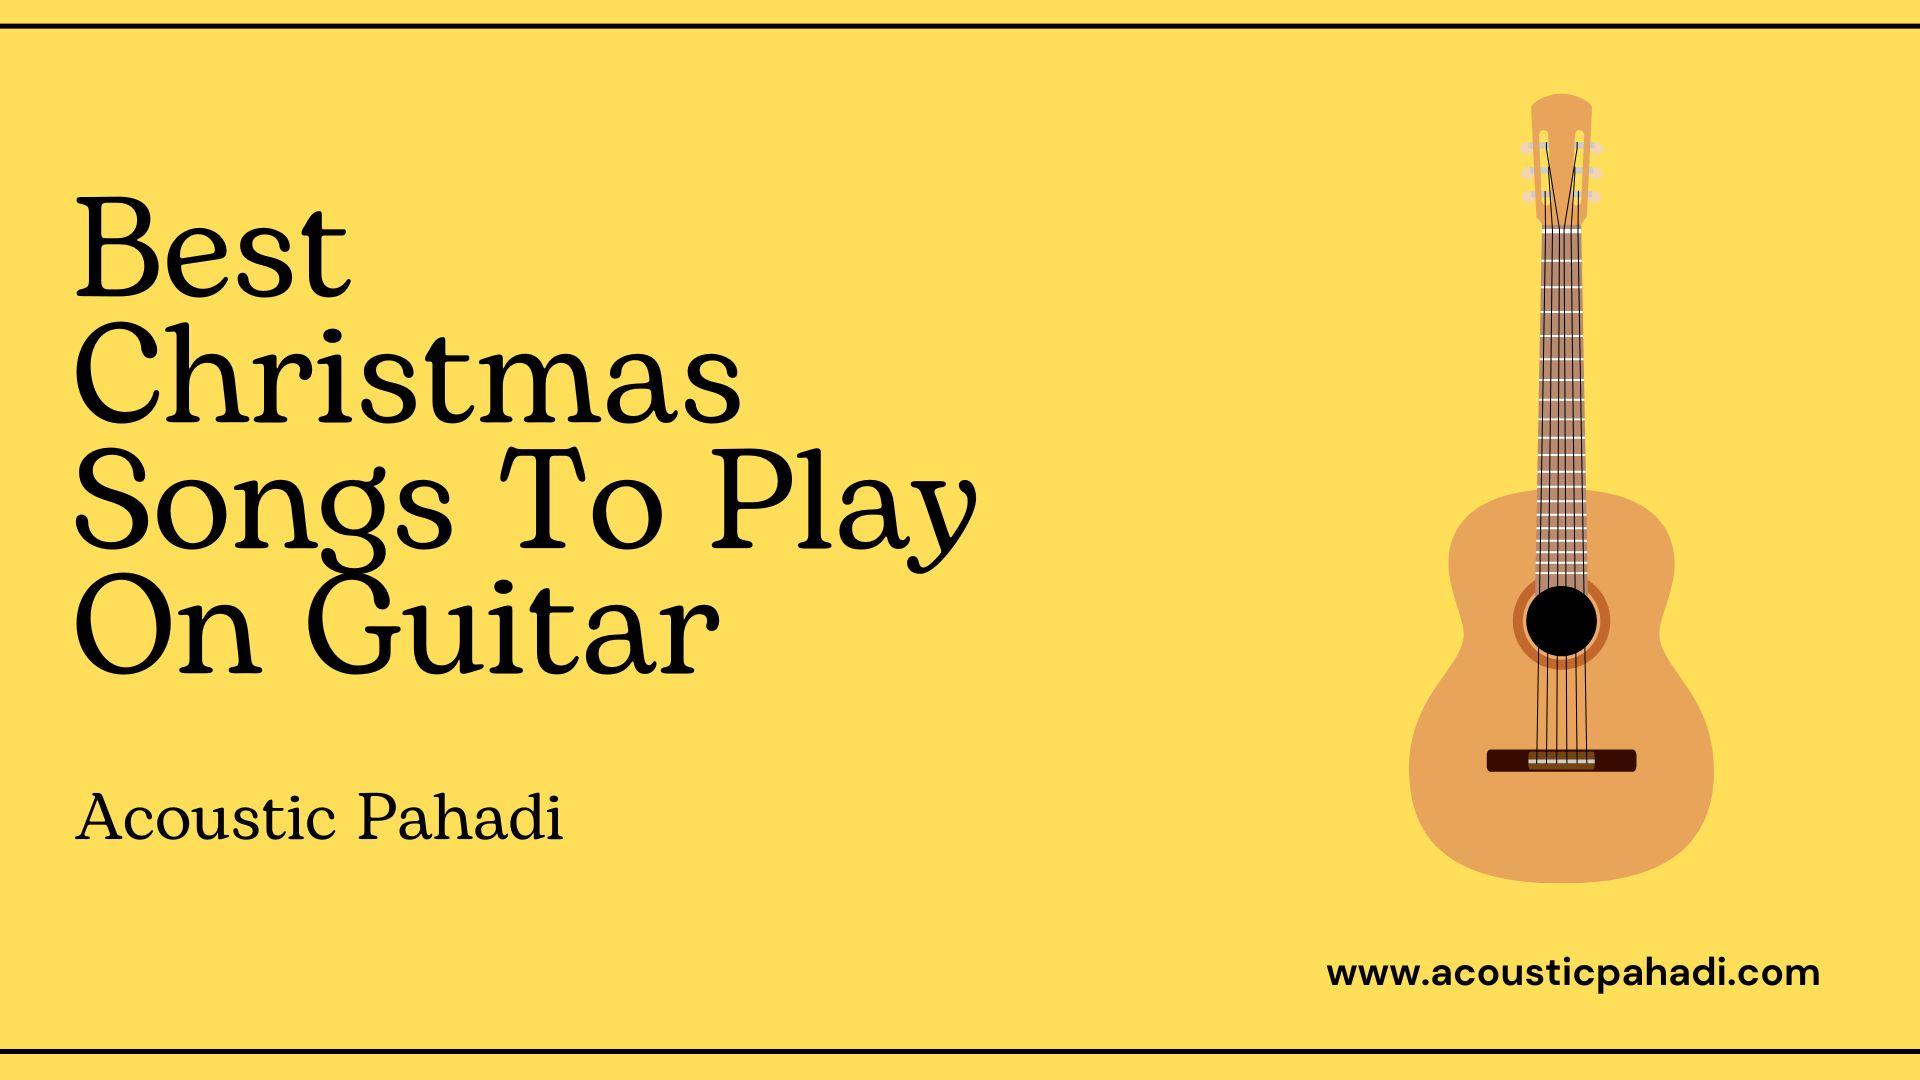 Best Christmas Songs To Play On Guitar